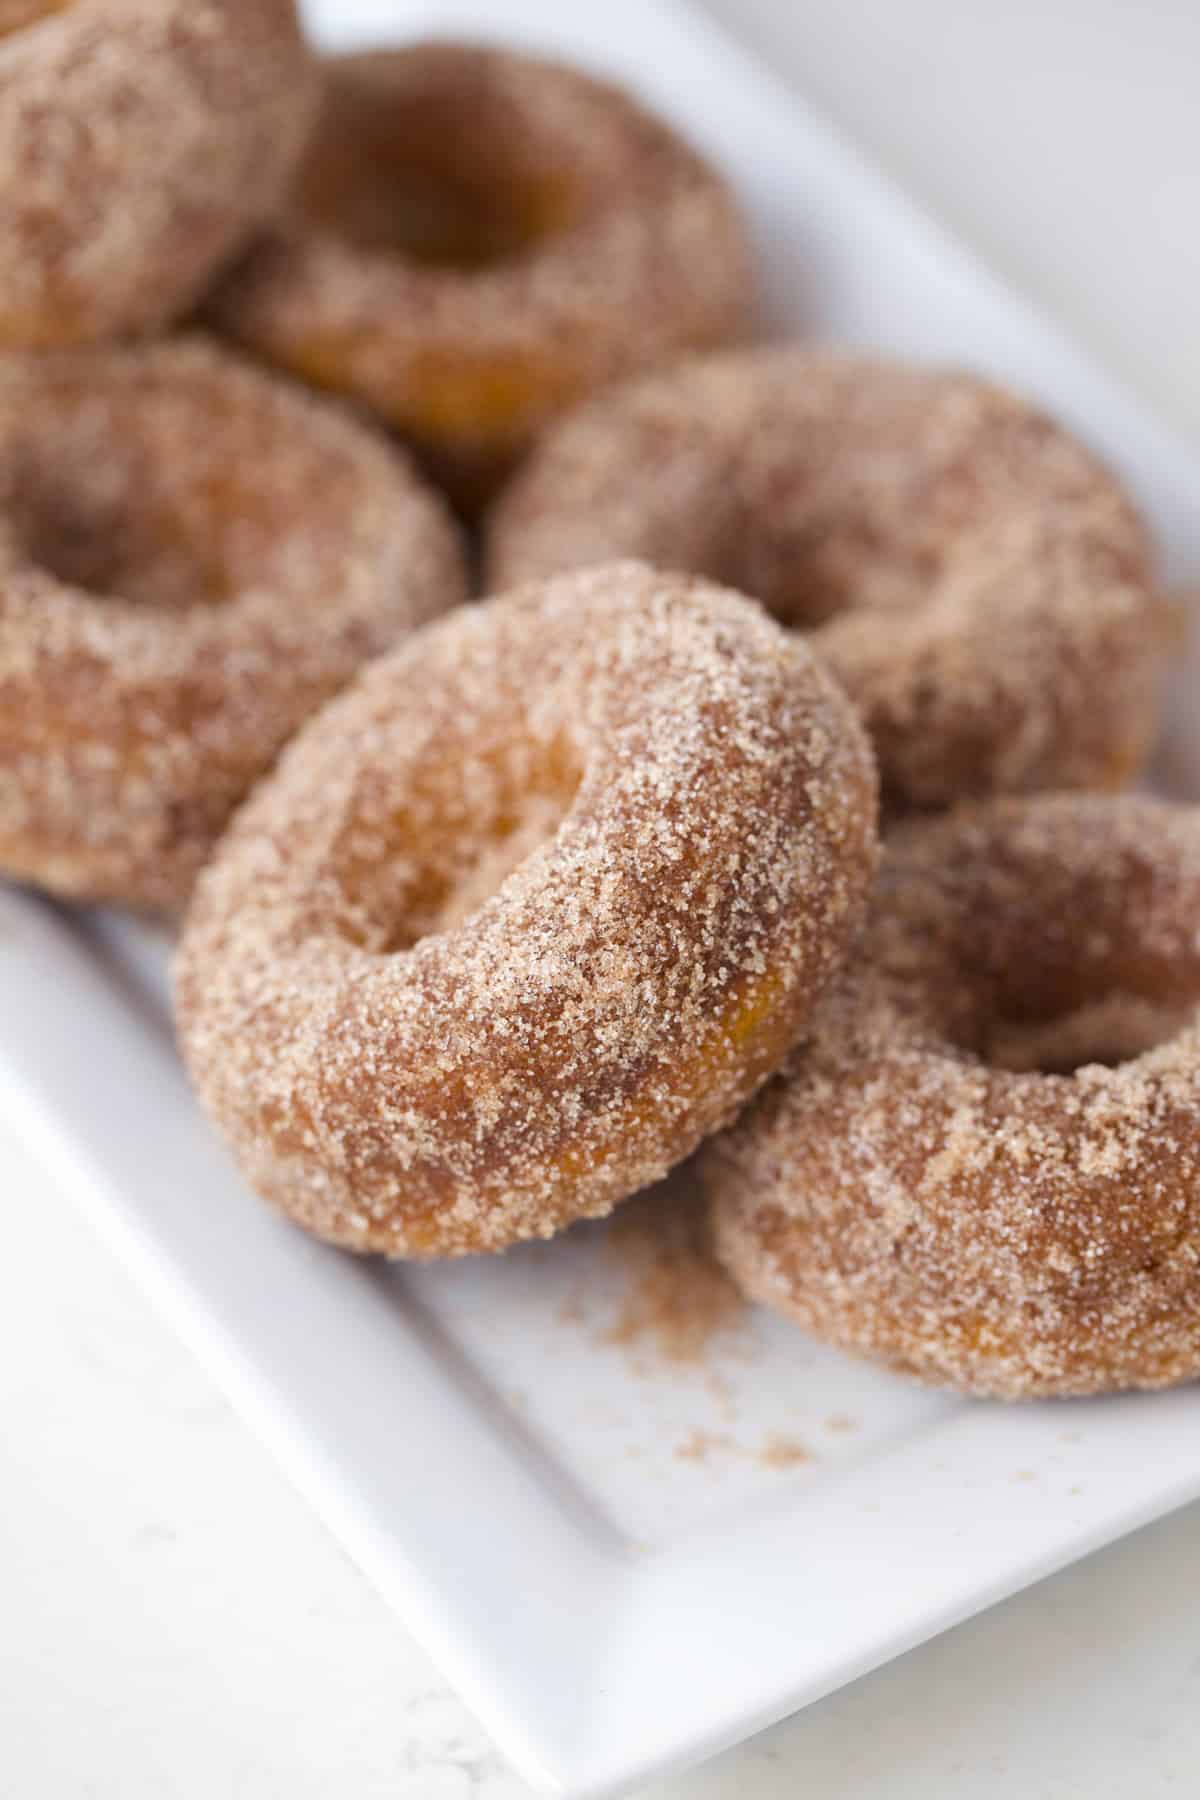 Pumpkin donuts piled high on a white plate.